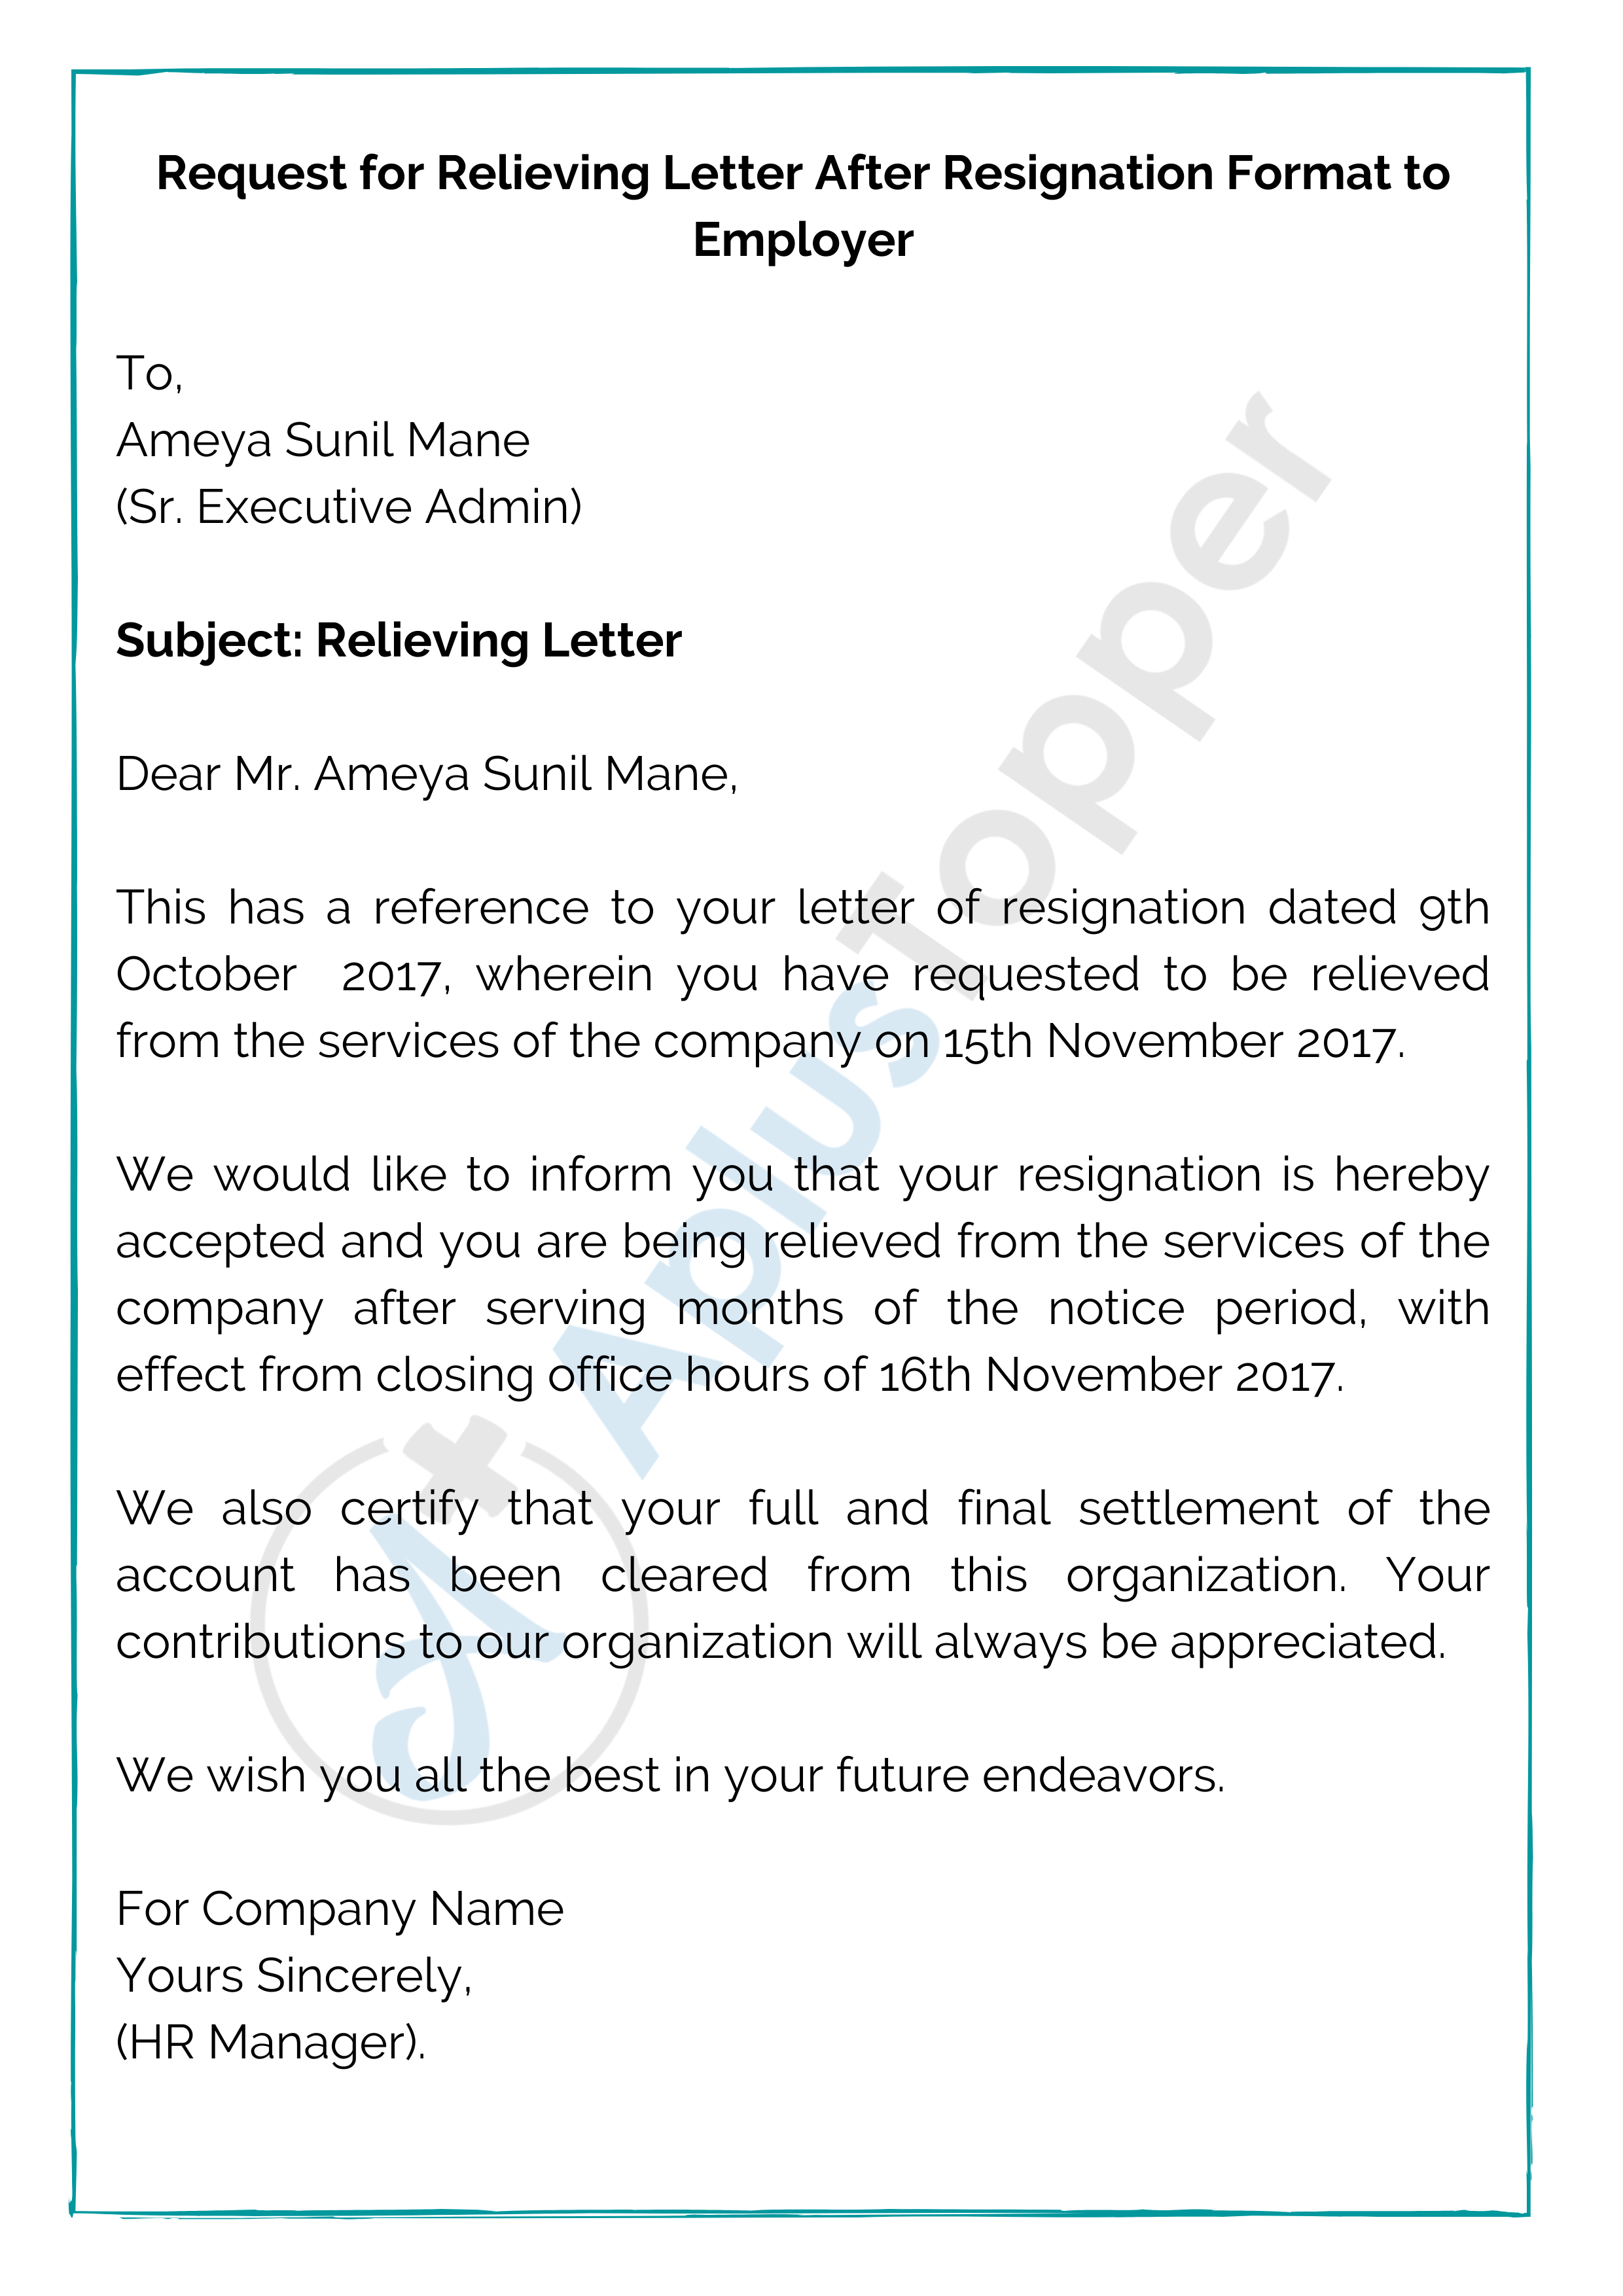 Request for Relieving Letter After Resignation Format to Employer